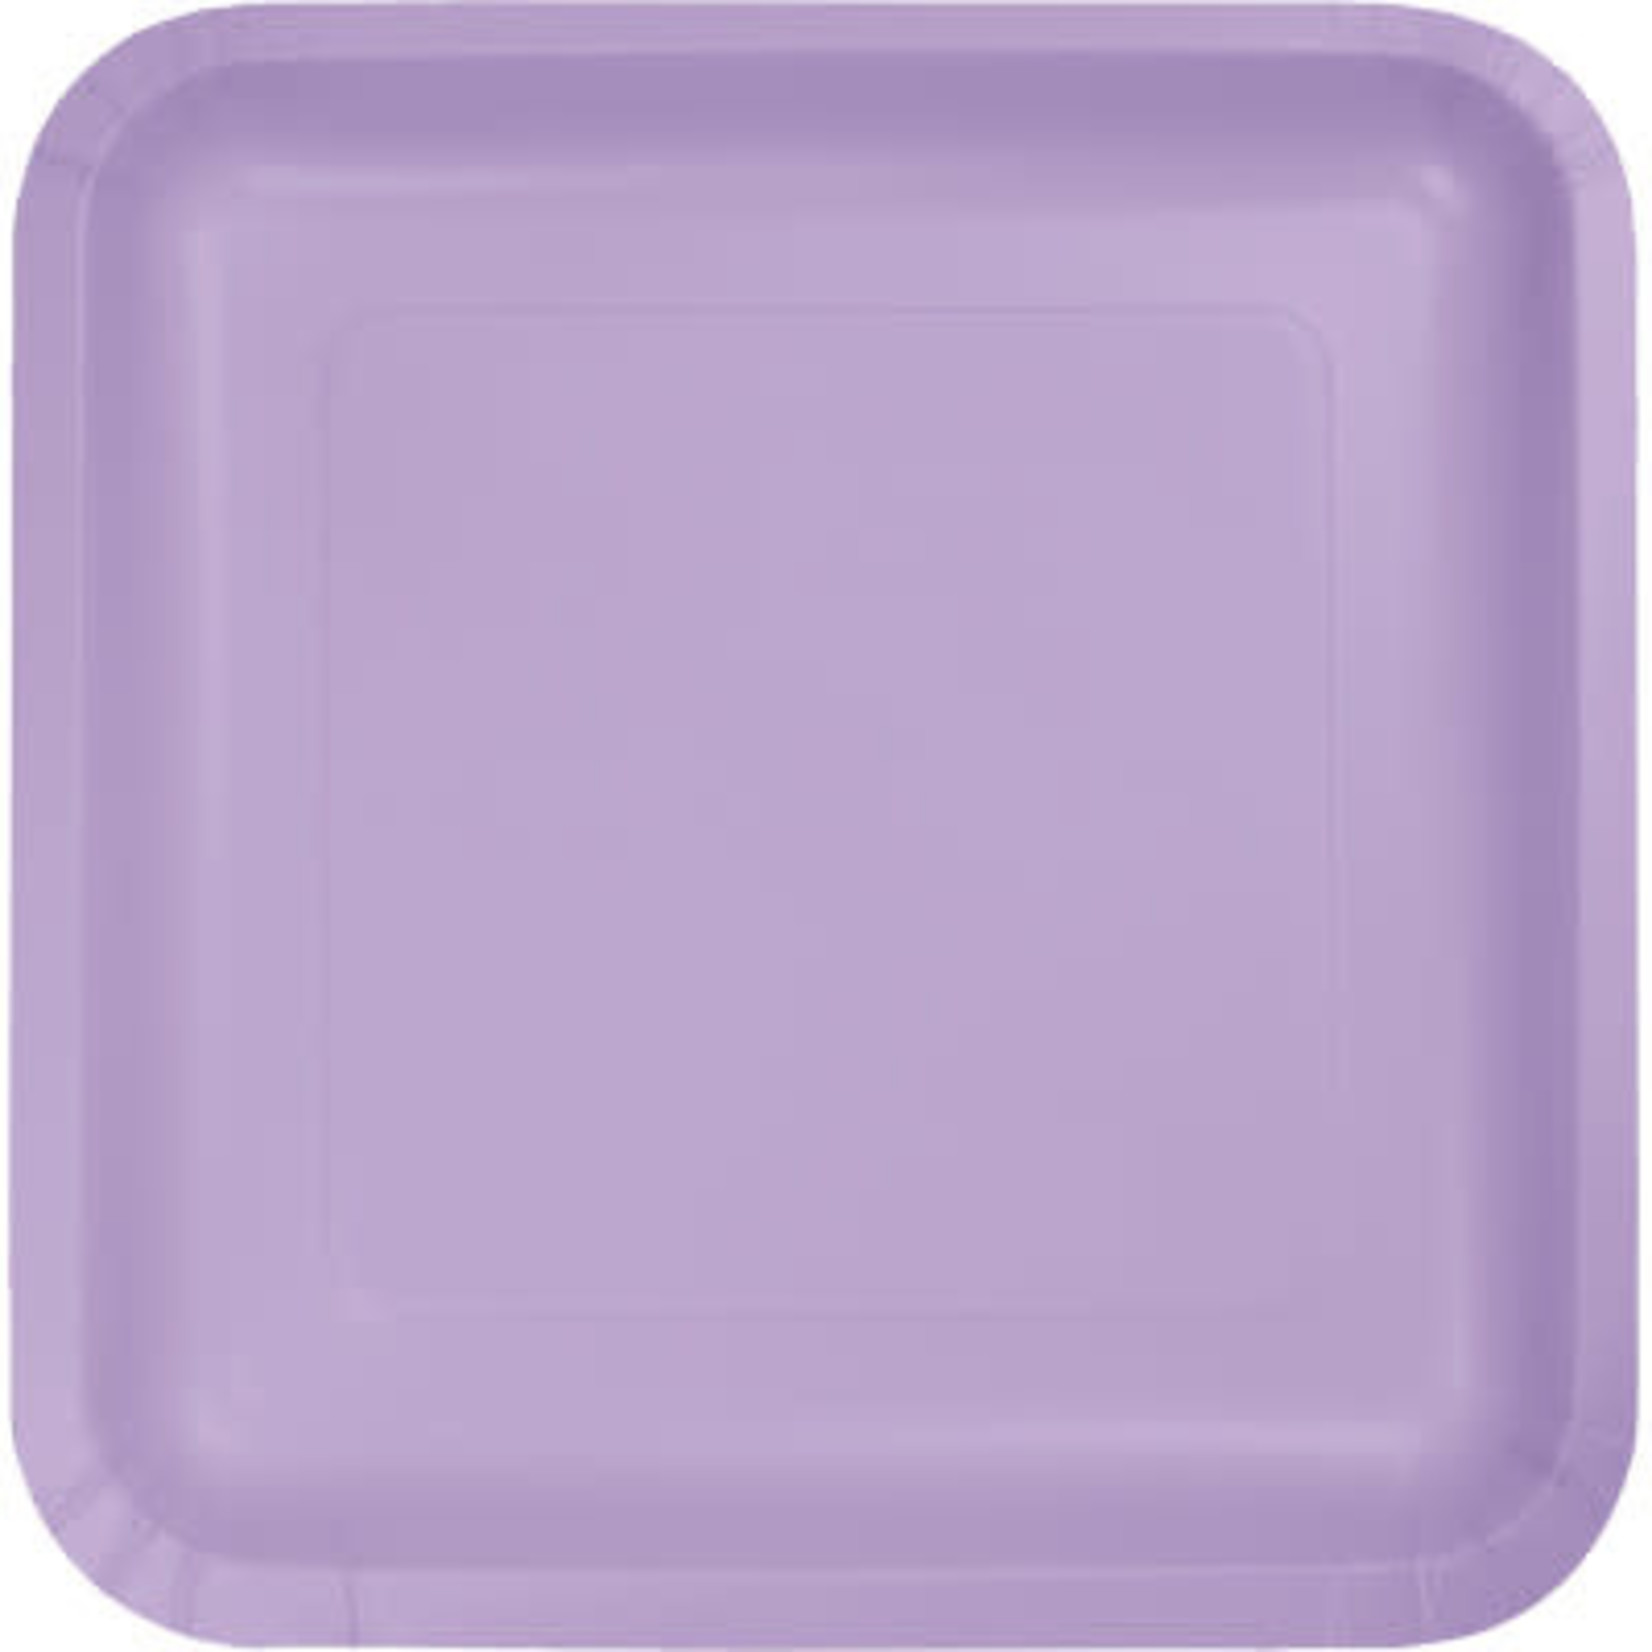 Touch of Color 9" Lavender Square Paper Plates - 18ct.